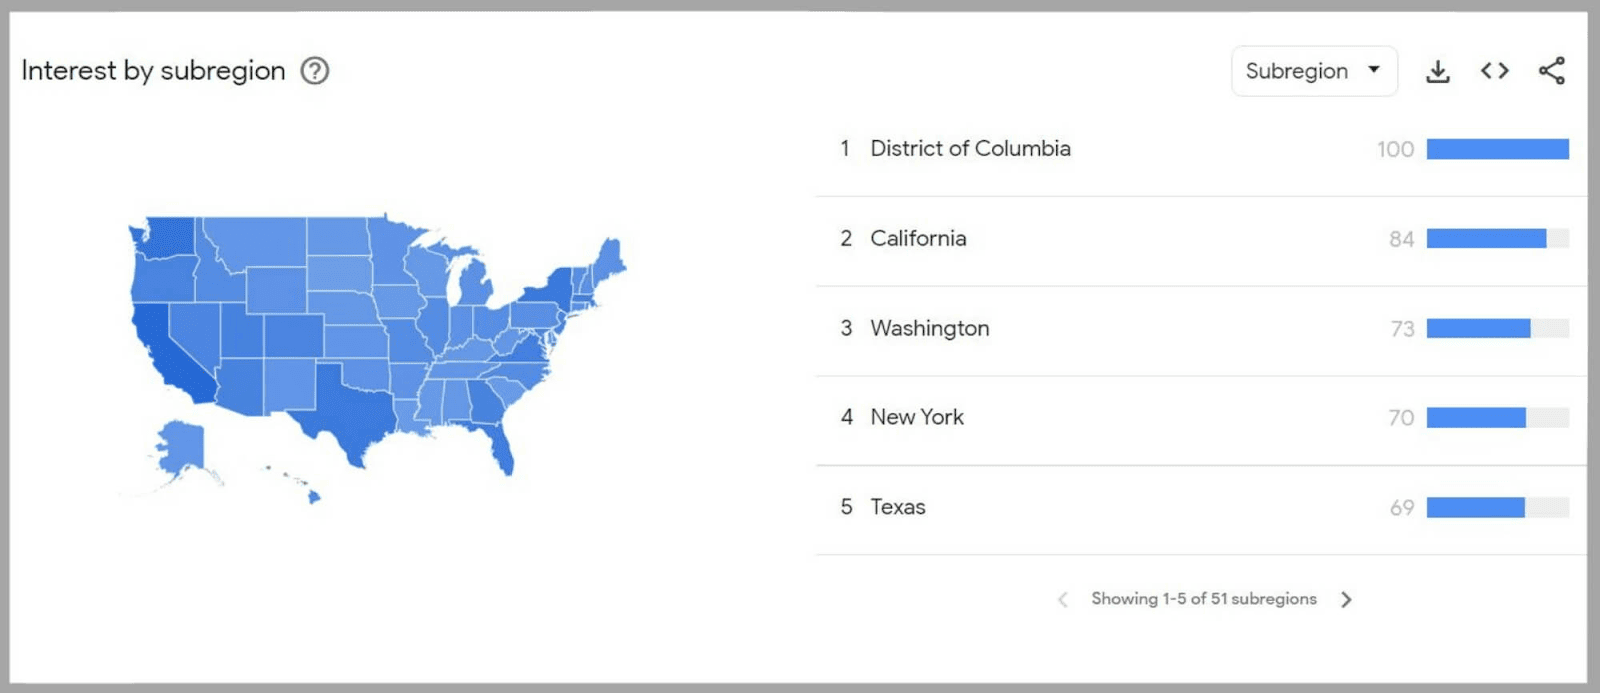 Interest by subregion as shown by Google Trend